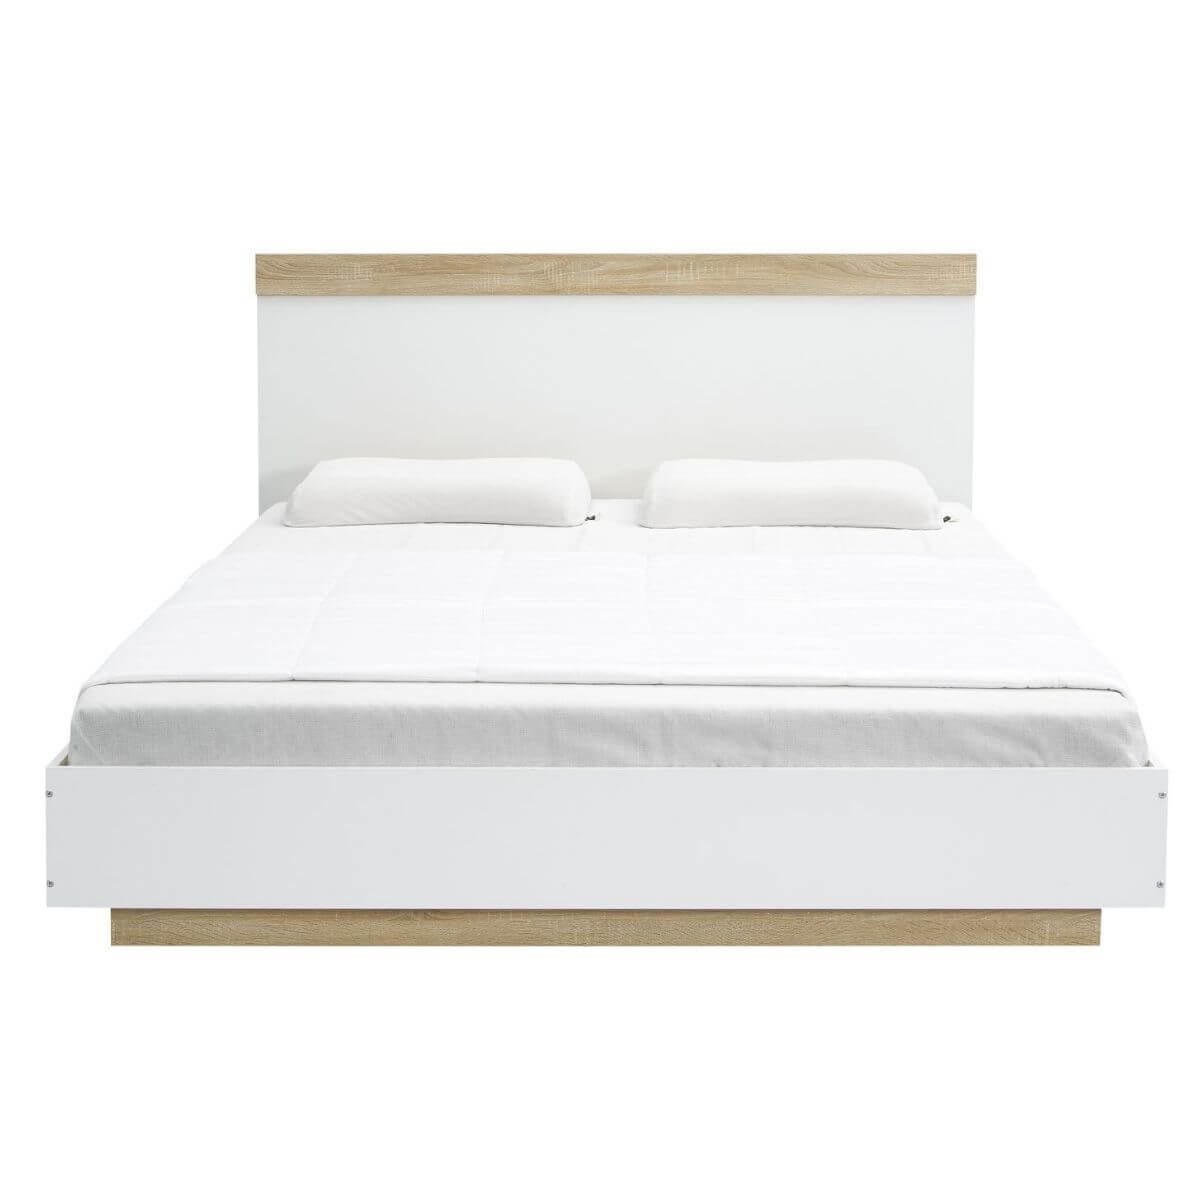 Aiden Industrial Contemporary White Oak Bed Frame King Size - Newstart Furniture